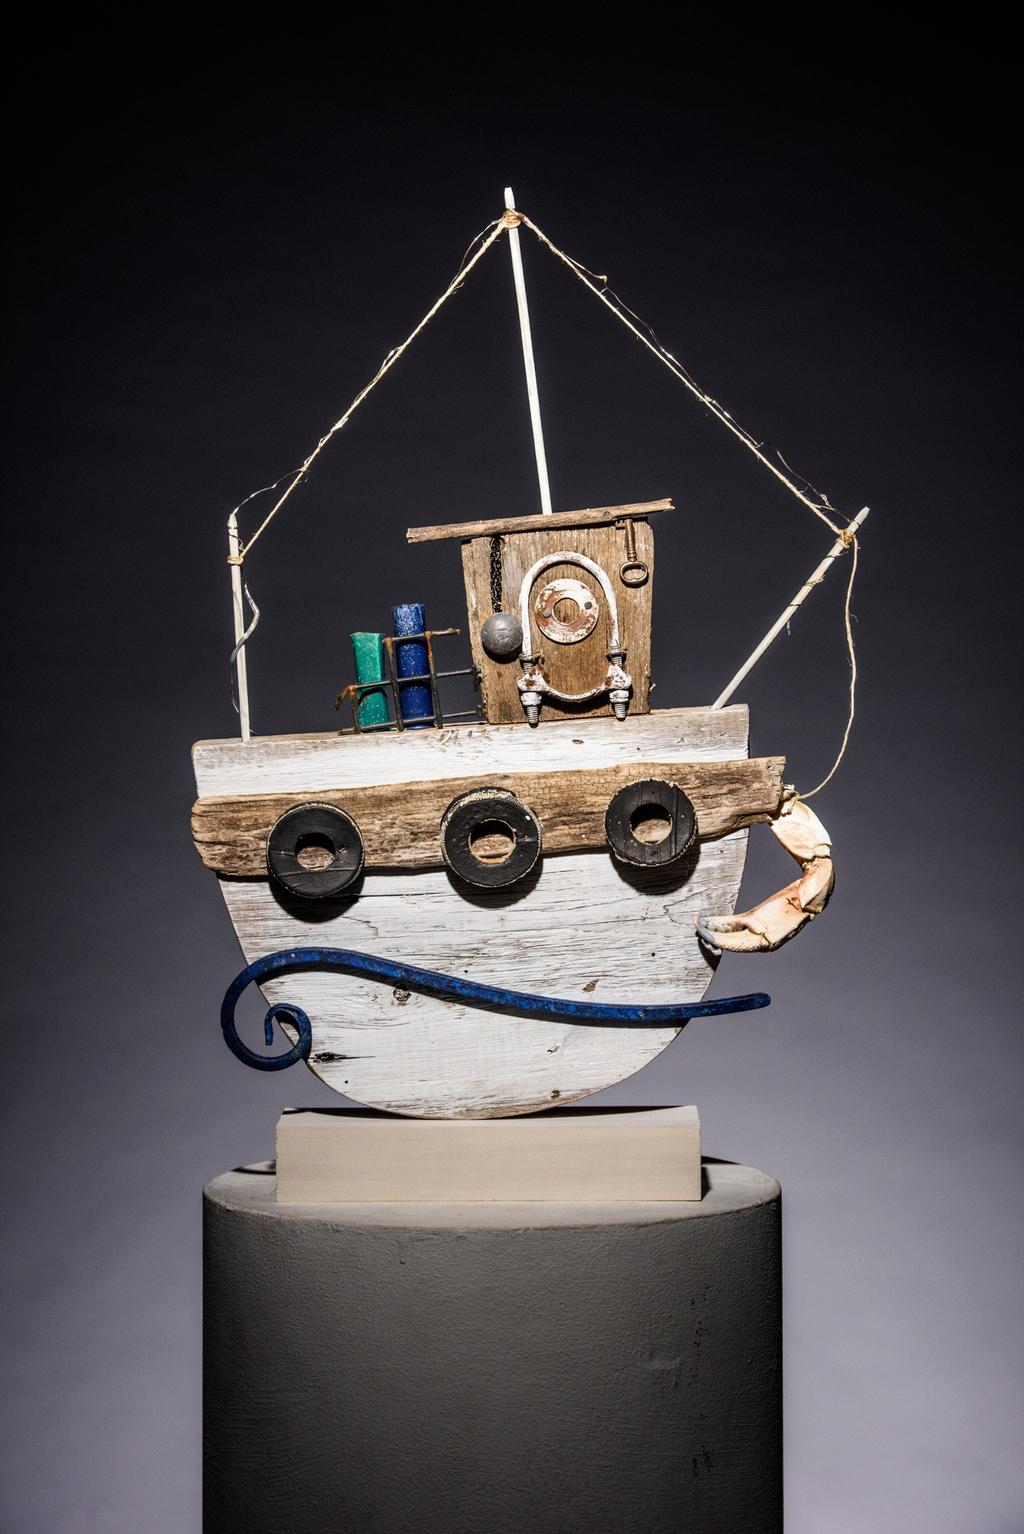 One of a Kind Trophies for a One of a Kind Event! We commission an accomplished New England artist to create unique nautical sculptures that are turned into trophies.